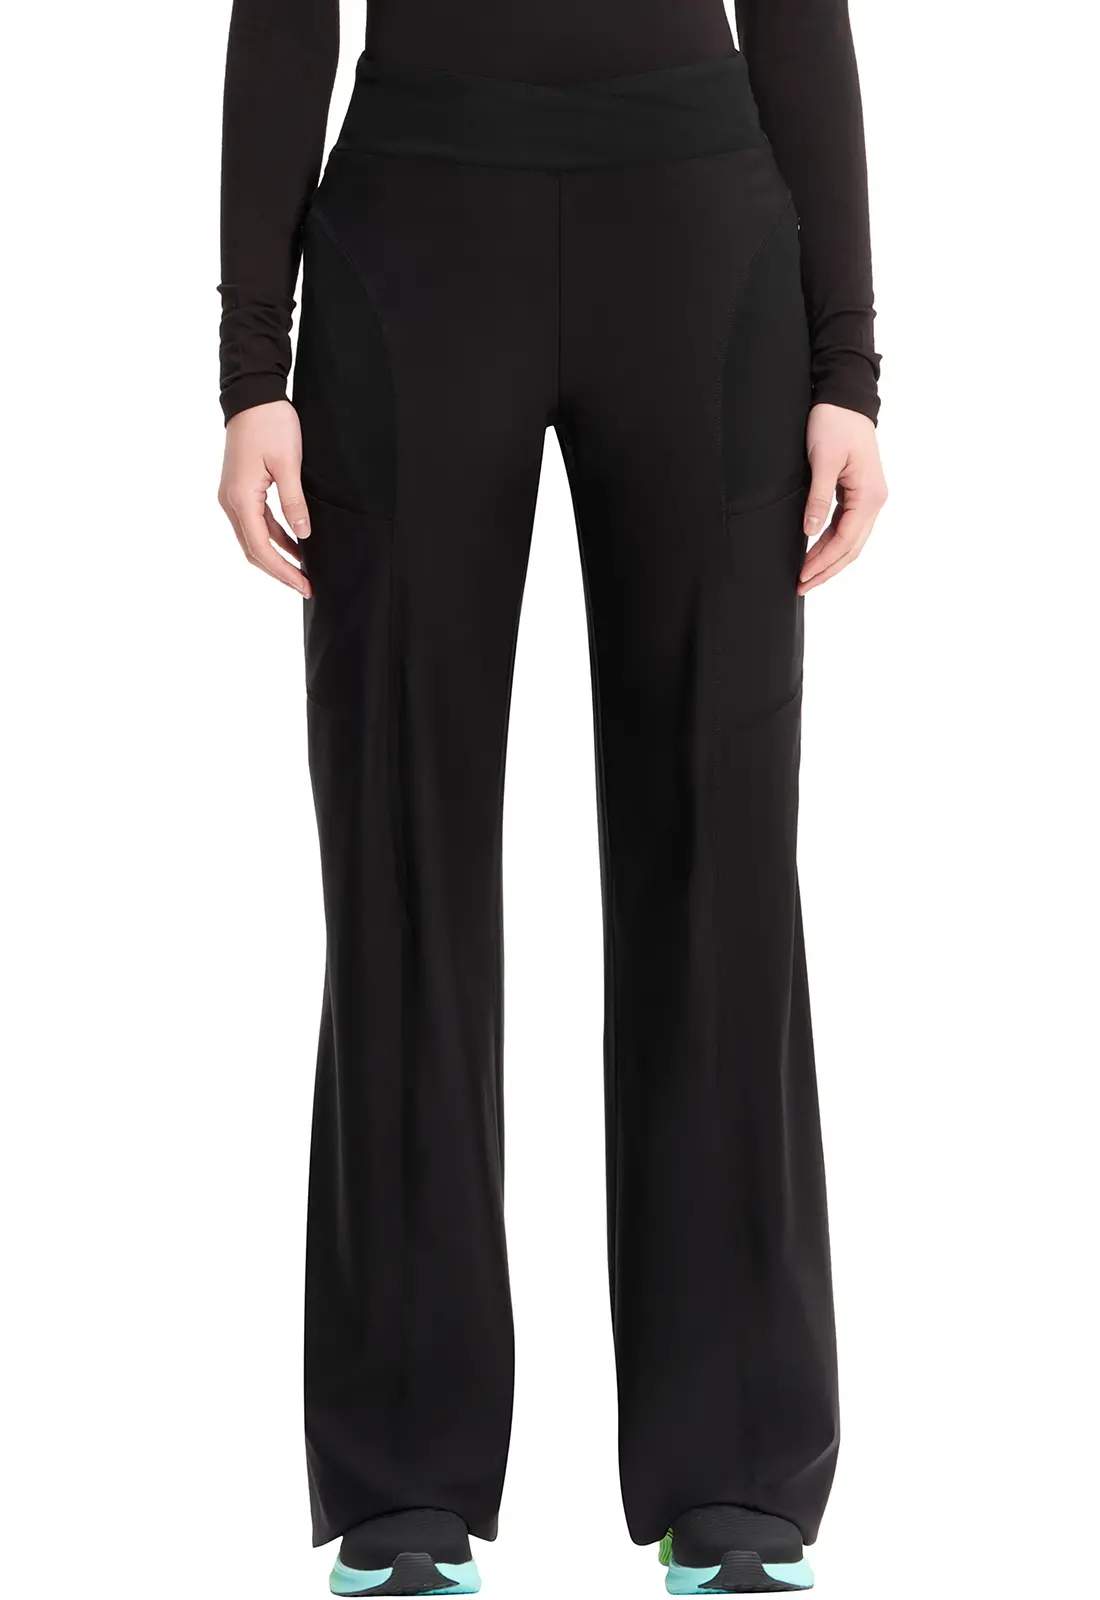 Knit Mid Rise Pull-on Trouser Pant